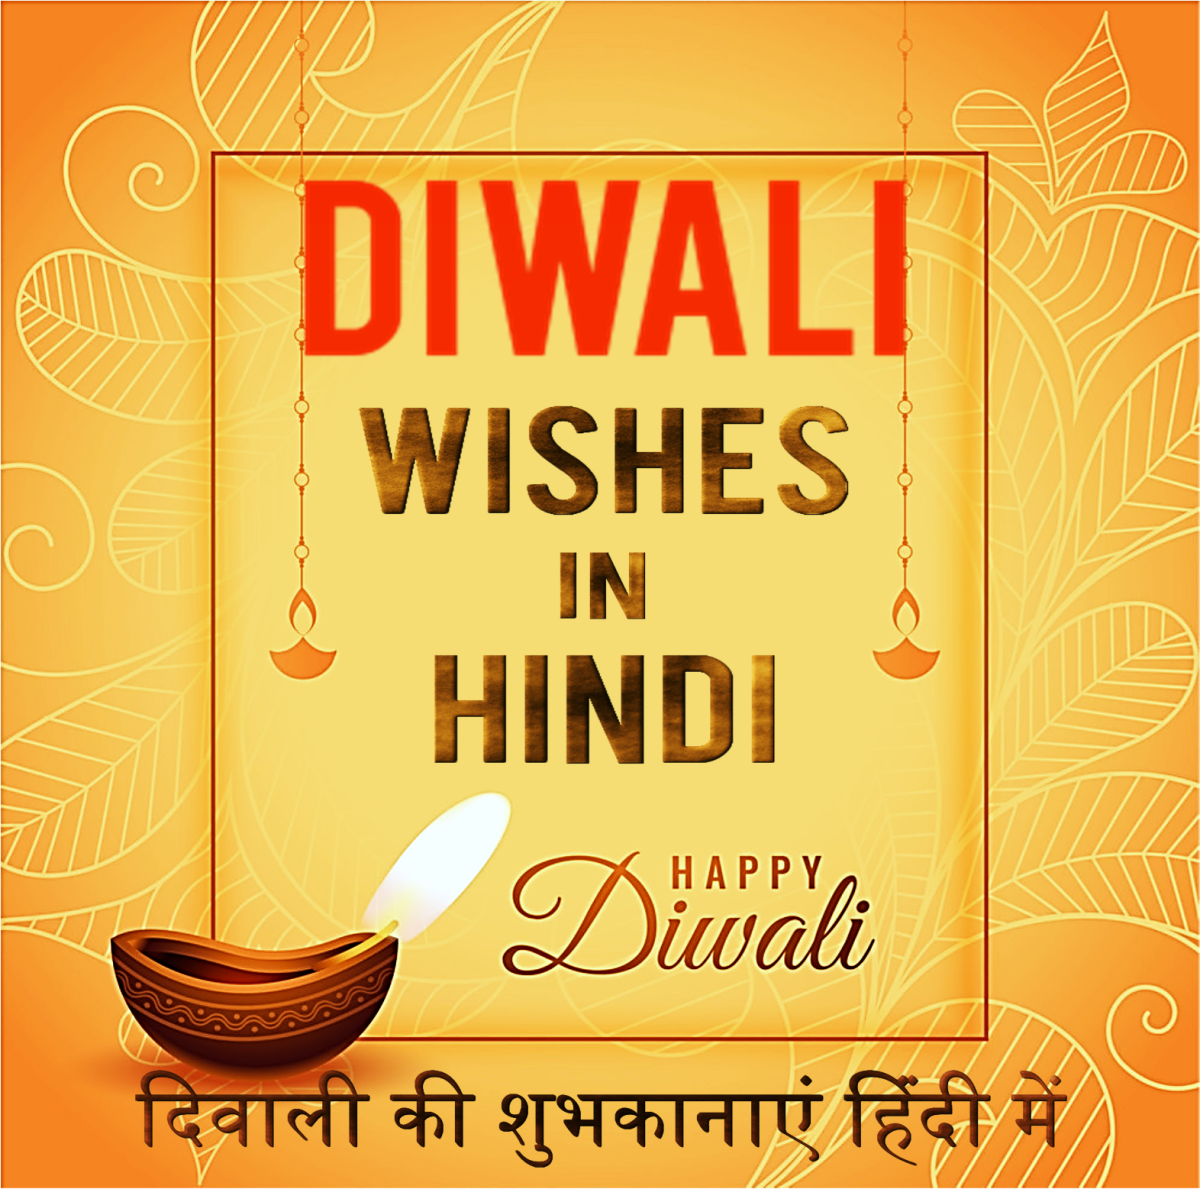 Diwali Wishes and Messages in Hindi & Sanskrit